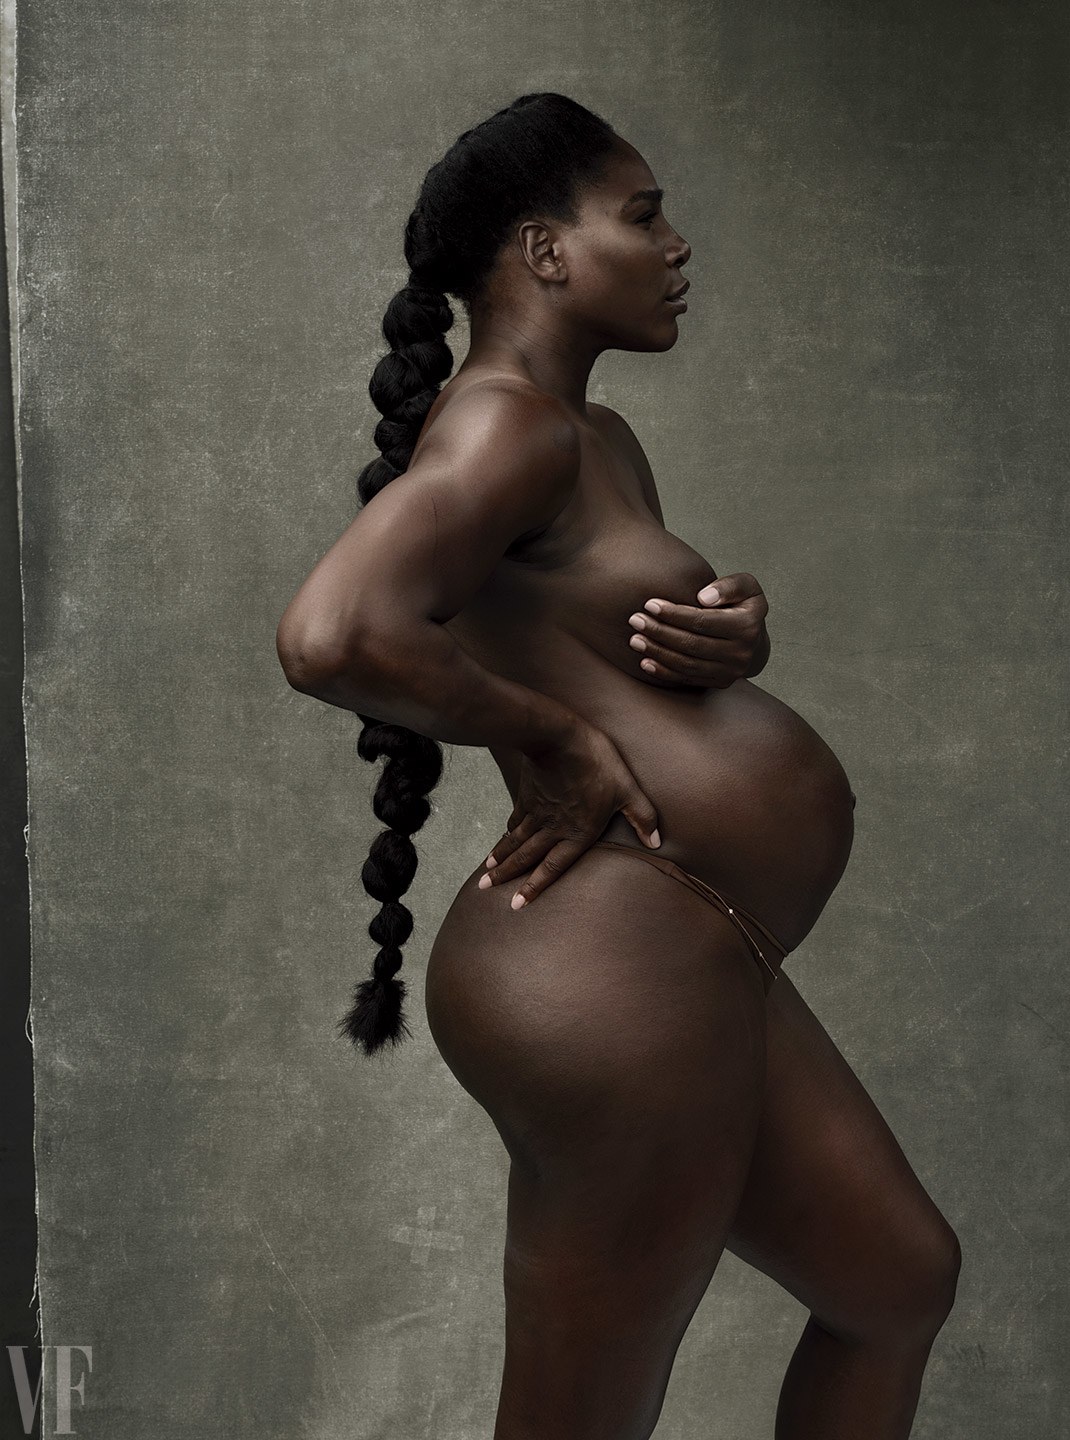 Serena Williams shows off her baby bump for Vanity Fair and Annie Leibovitz